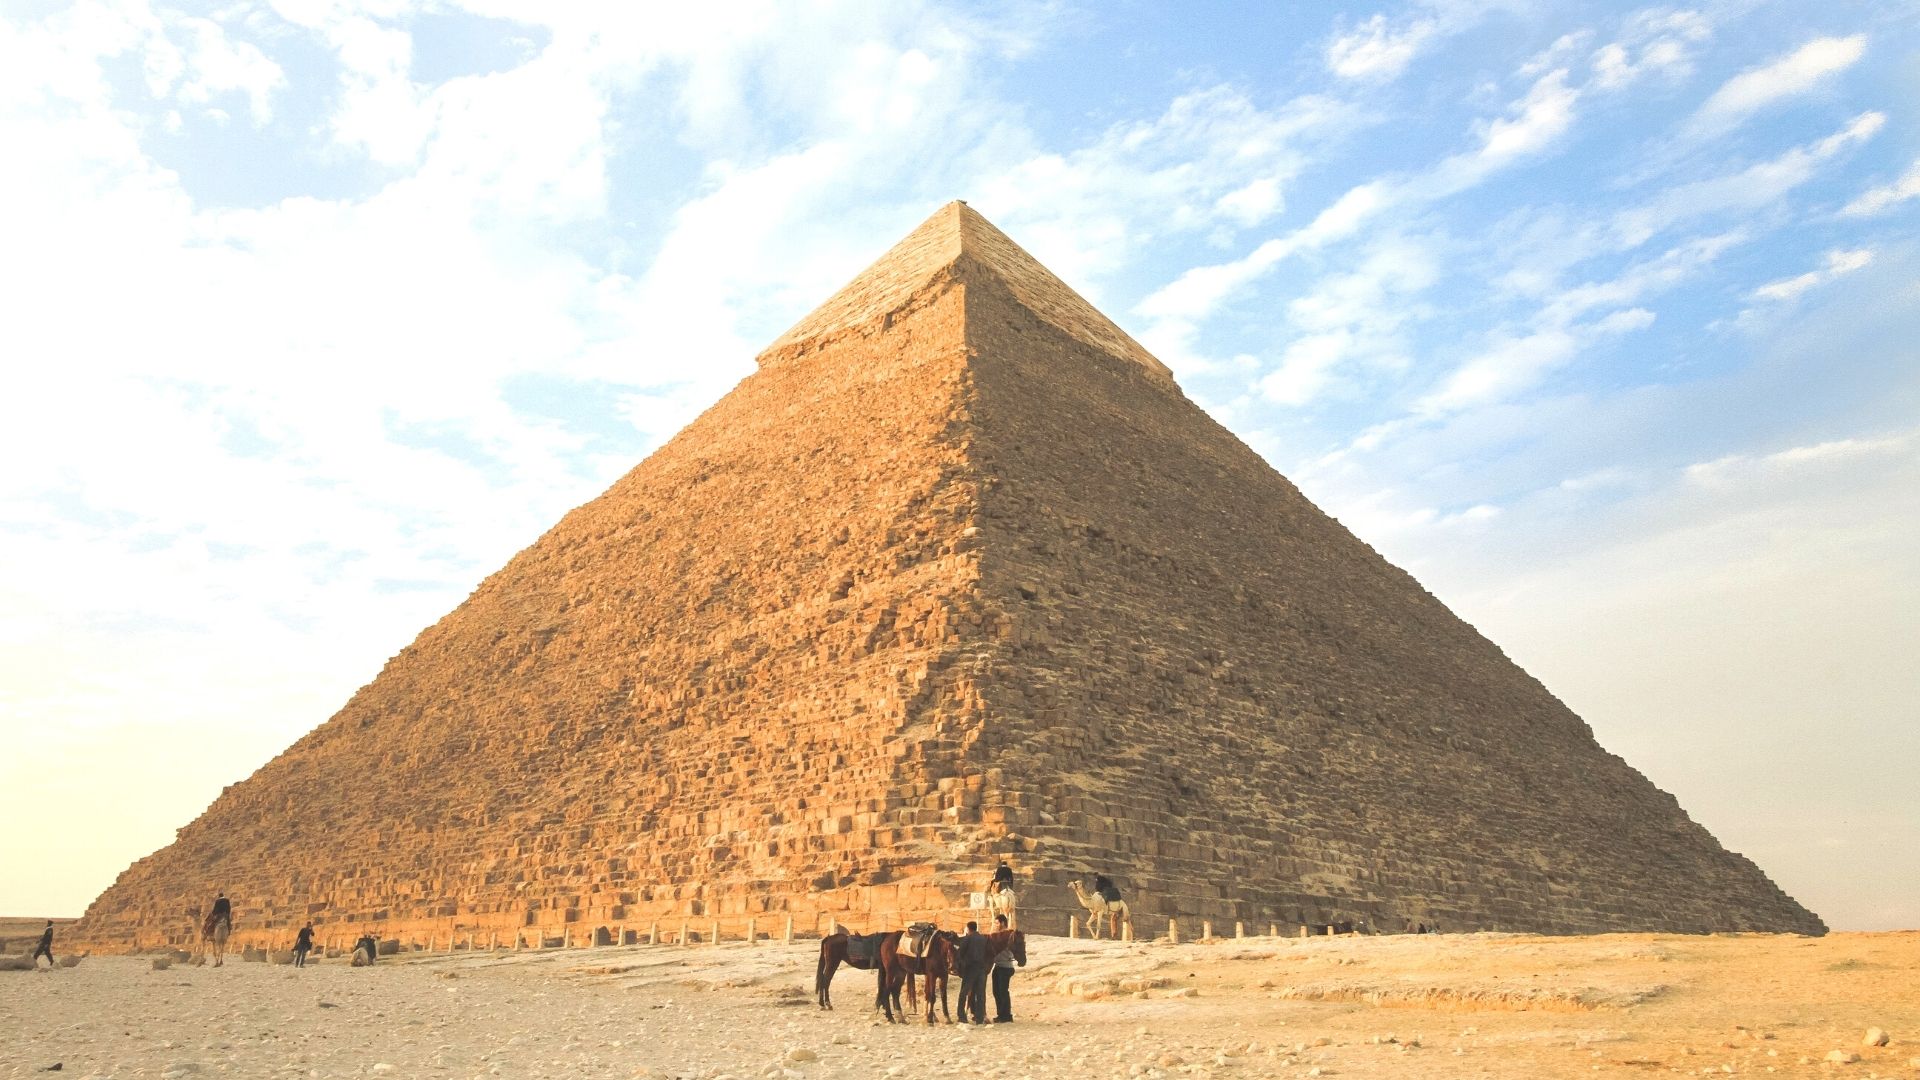 In June, the Arab World Institute invites you to live an immersive experience in the heart of the pyramid!